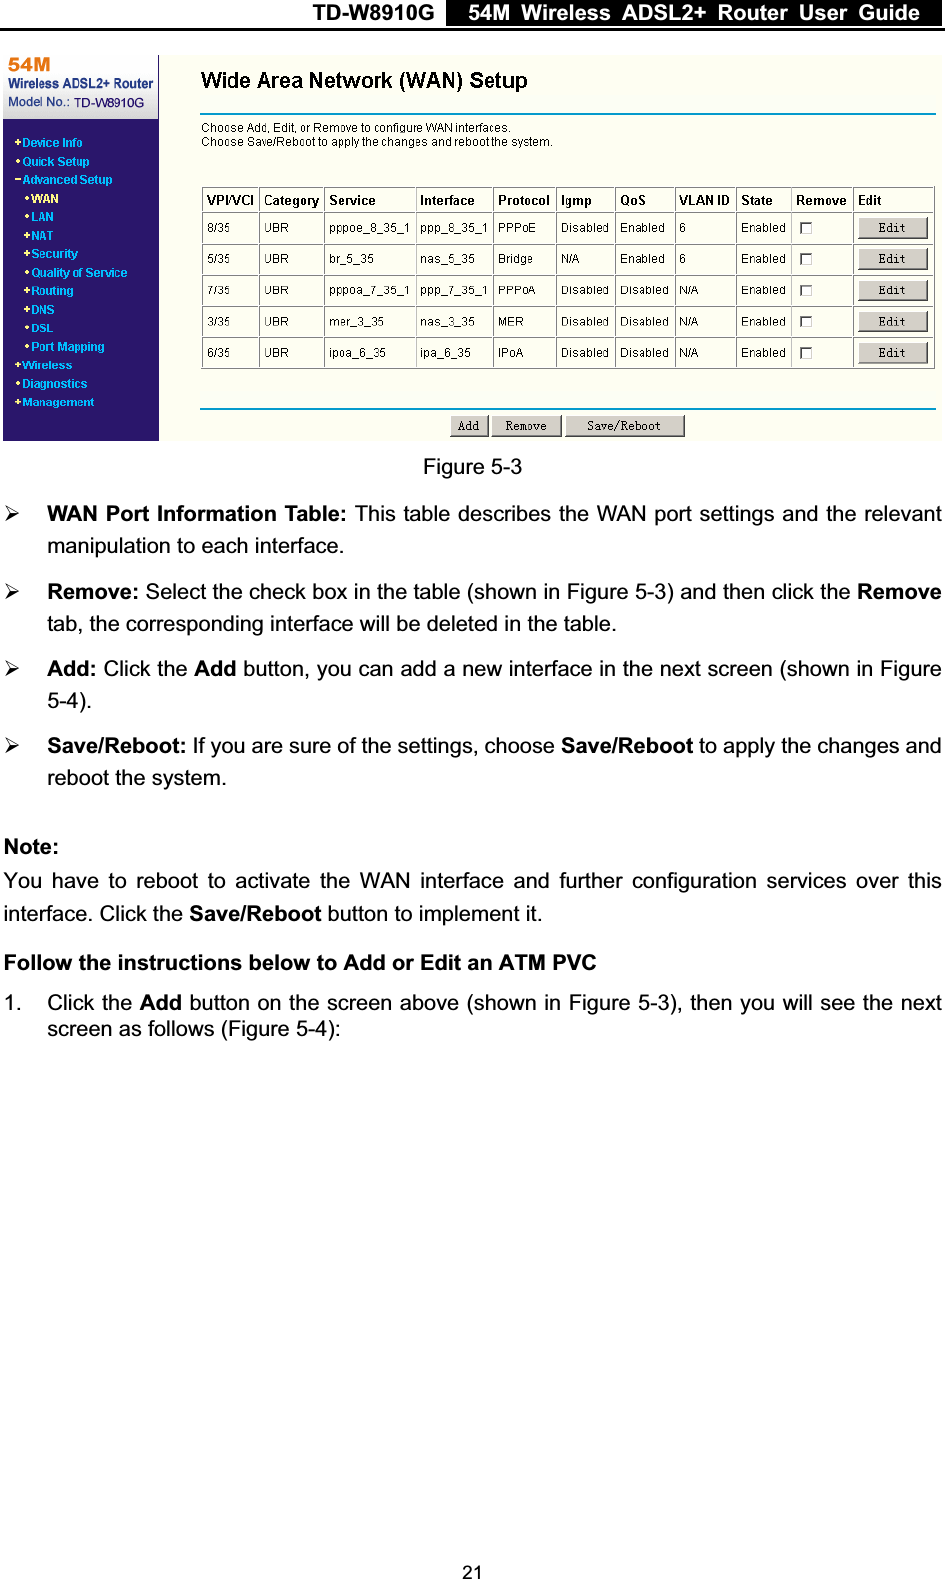 TD-W8910G    54M Wireless ADSL2+ Router User Guide  Figure 5-3 ¾WAN Port Information Table: This table describes the WAN port settings and the relevant manipulation to each interface. ¾Remove: Select the check box in the table (shown in Figure 5-3) and then click the Removetab, the corresponding interface will be deleted in the table. ¾Add: Click the Add button, you can add a new interface in the next screen (shown in Figure 5-4).¾Save/Reboot: If you are sure of the settings, choose Save/Reboot to apply the changes and reboot the system. Note:You have to reboot to activate the WAN interface and further configuration services over this interface. Click the Save/Reboot button to implement it. Follow the instructions below to Add or Edit an ATM PVC 1. Click the Add button on the screen above (shown in Figure 5-3), then you will see the next screen as follows (Figure 5-4): 21